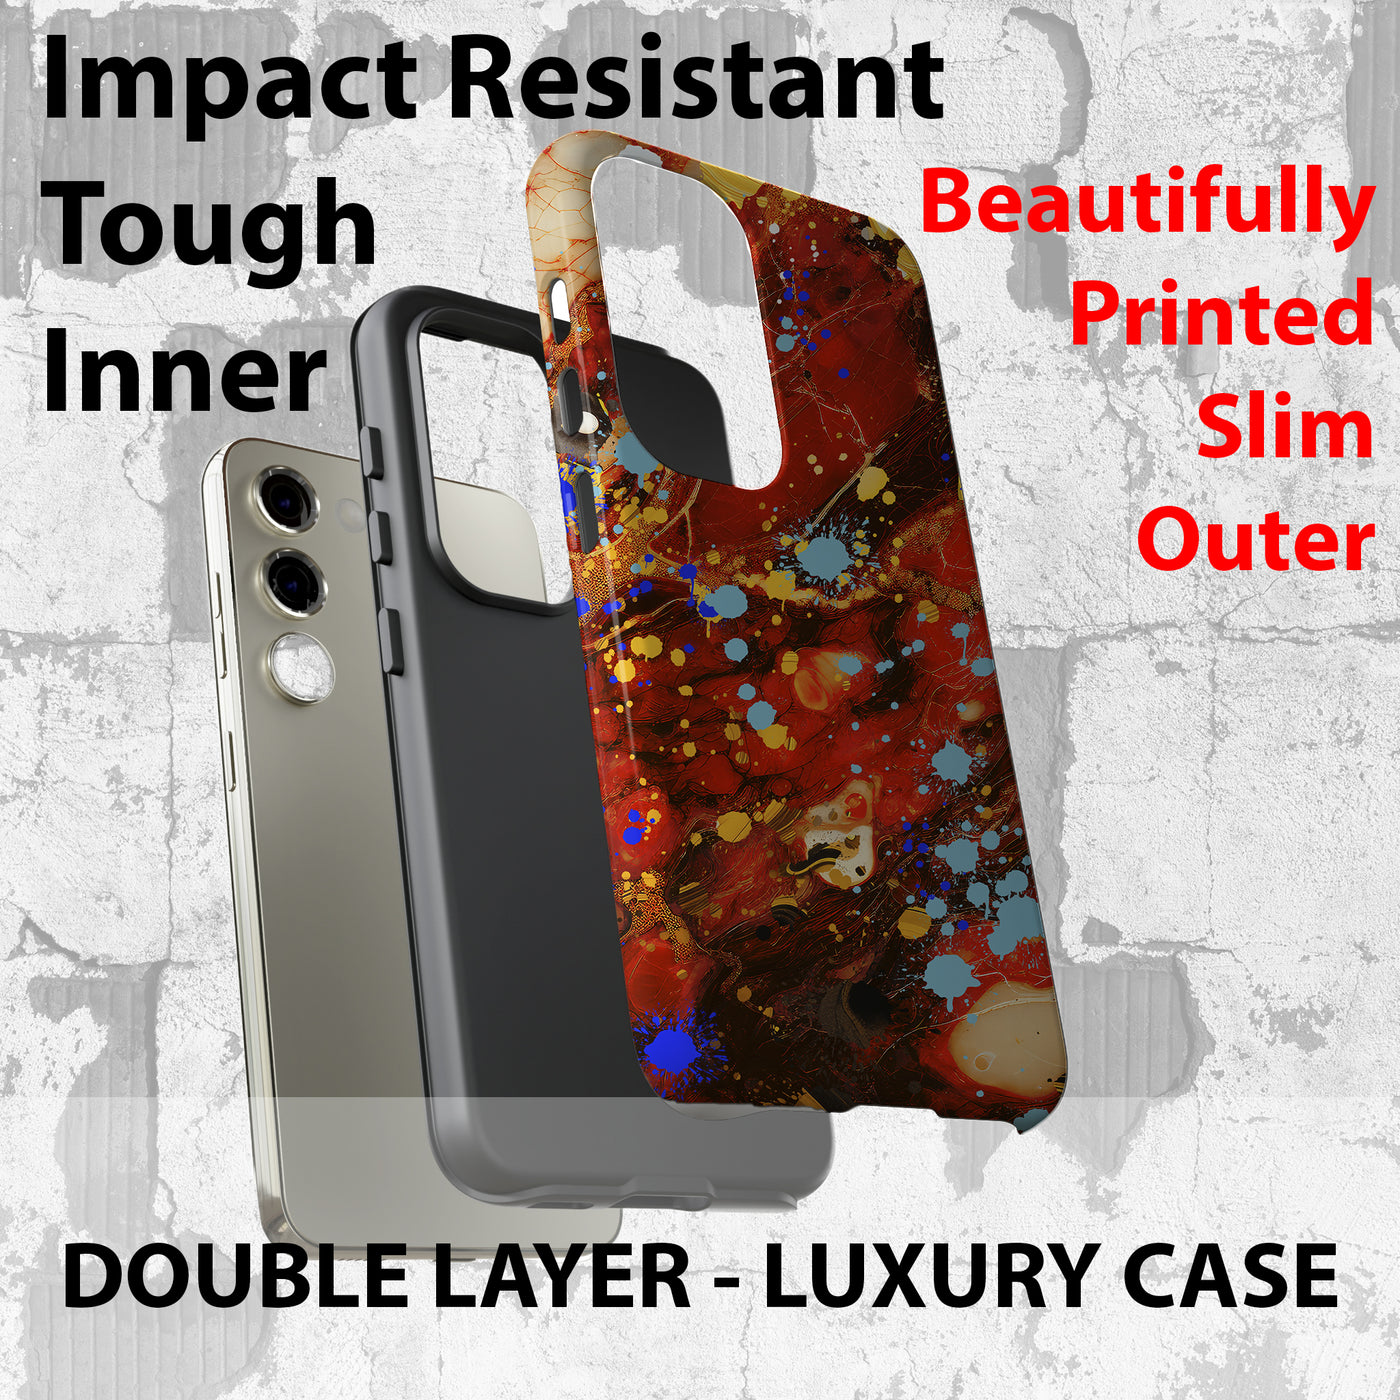 Samsung Galaxy Phone Case | Galaxy S23, S22, S21, S20 | Luxury Case Double Layered | Impact Resistant | Fashionable - Paint Spill 2